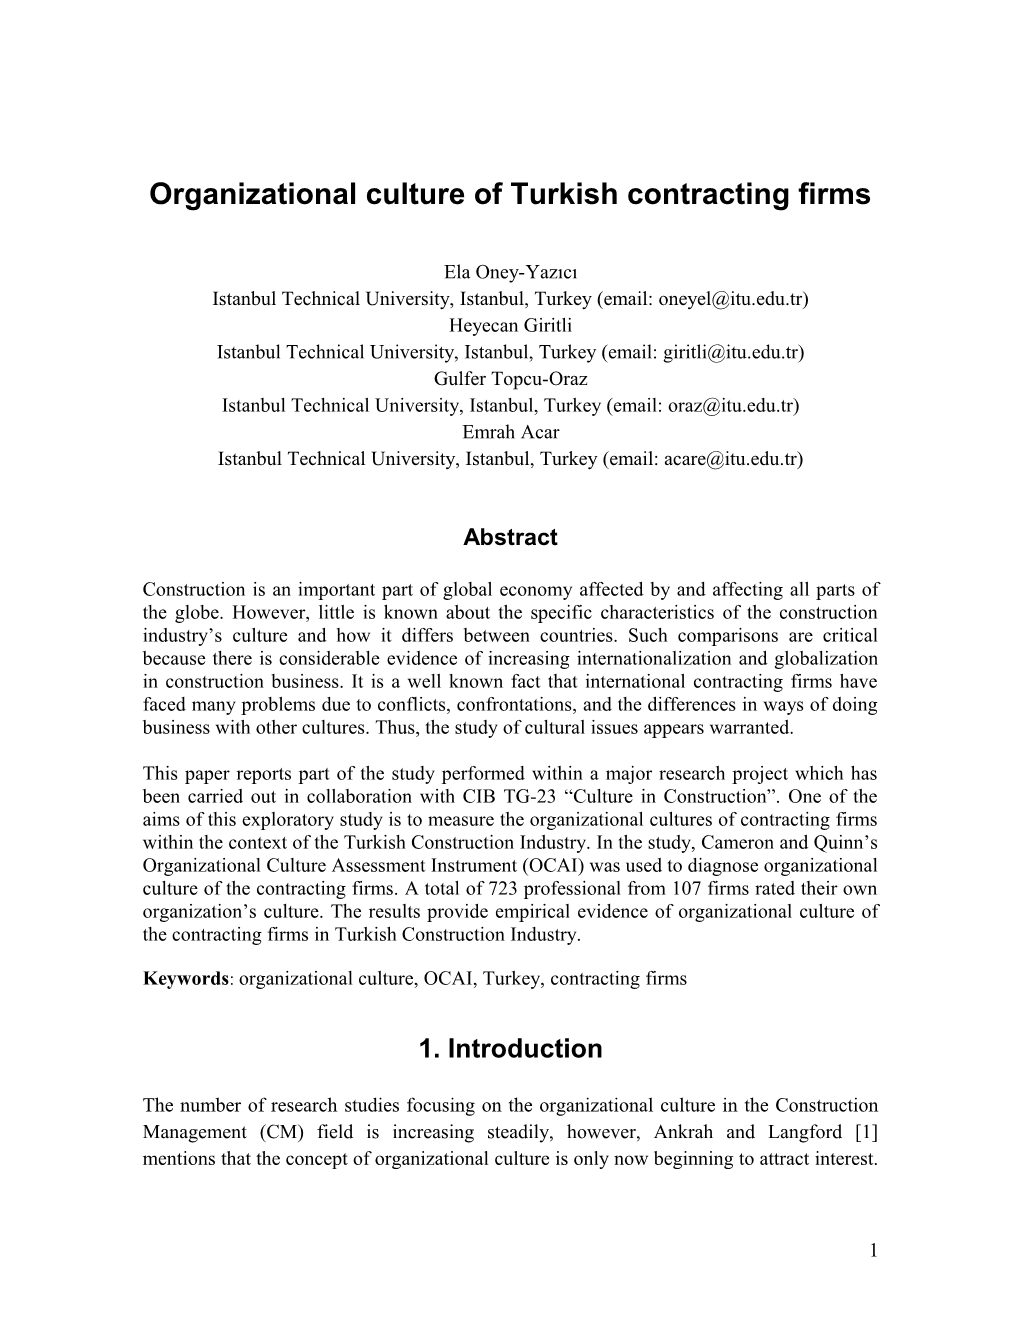 Organizational Culture of Turkish Contracting Firms